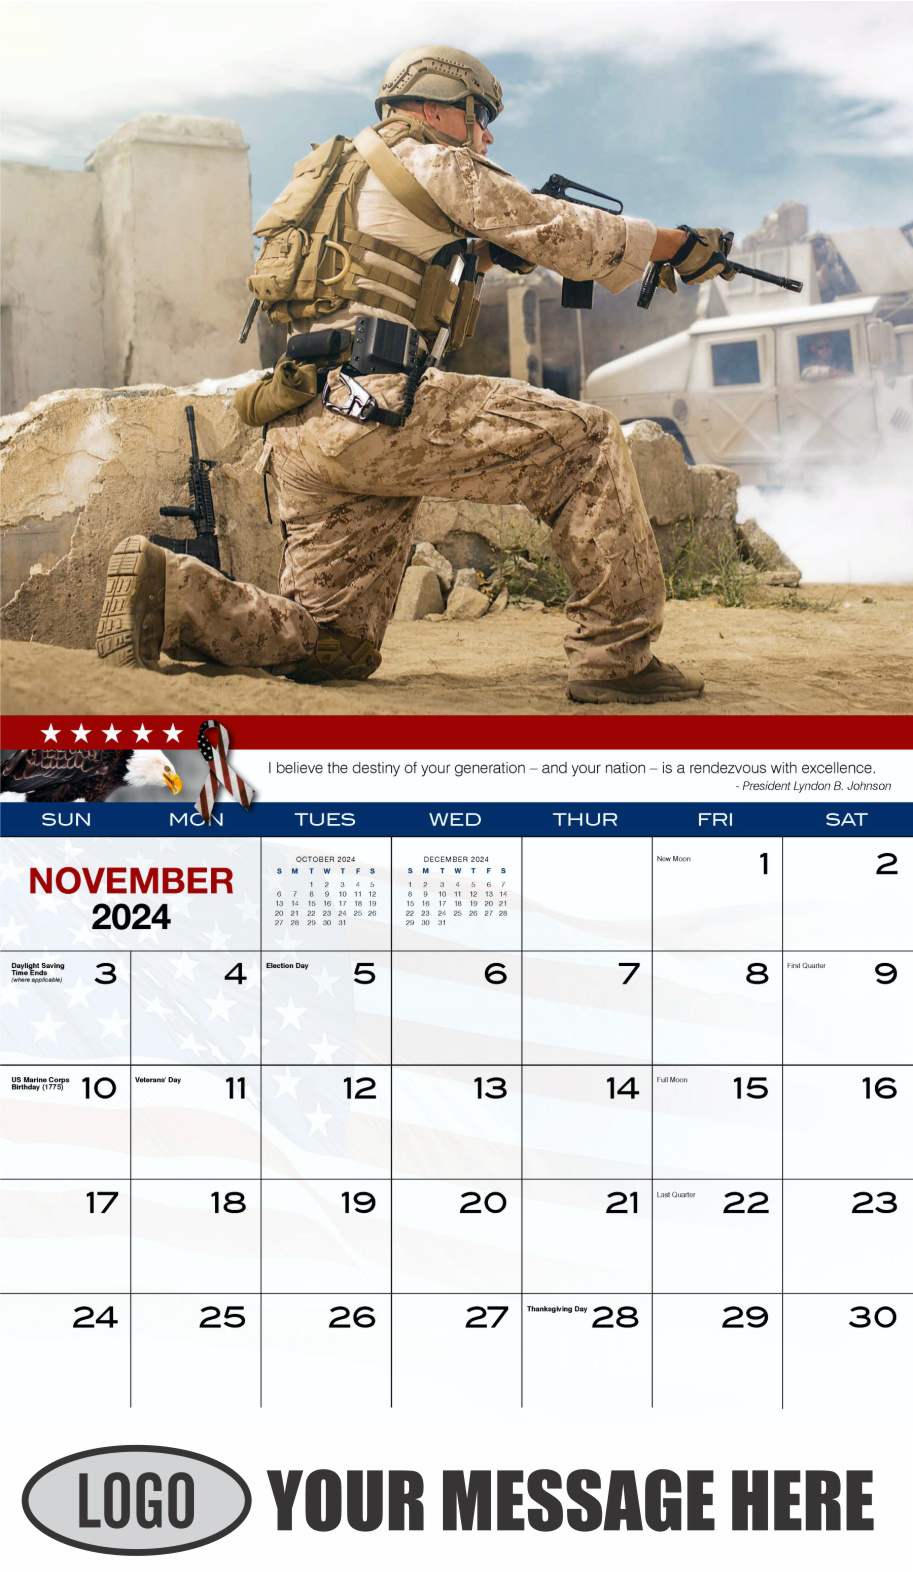 Home of the Brave 2024 USA Armed Forces Business Promo Calendar - November